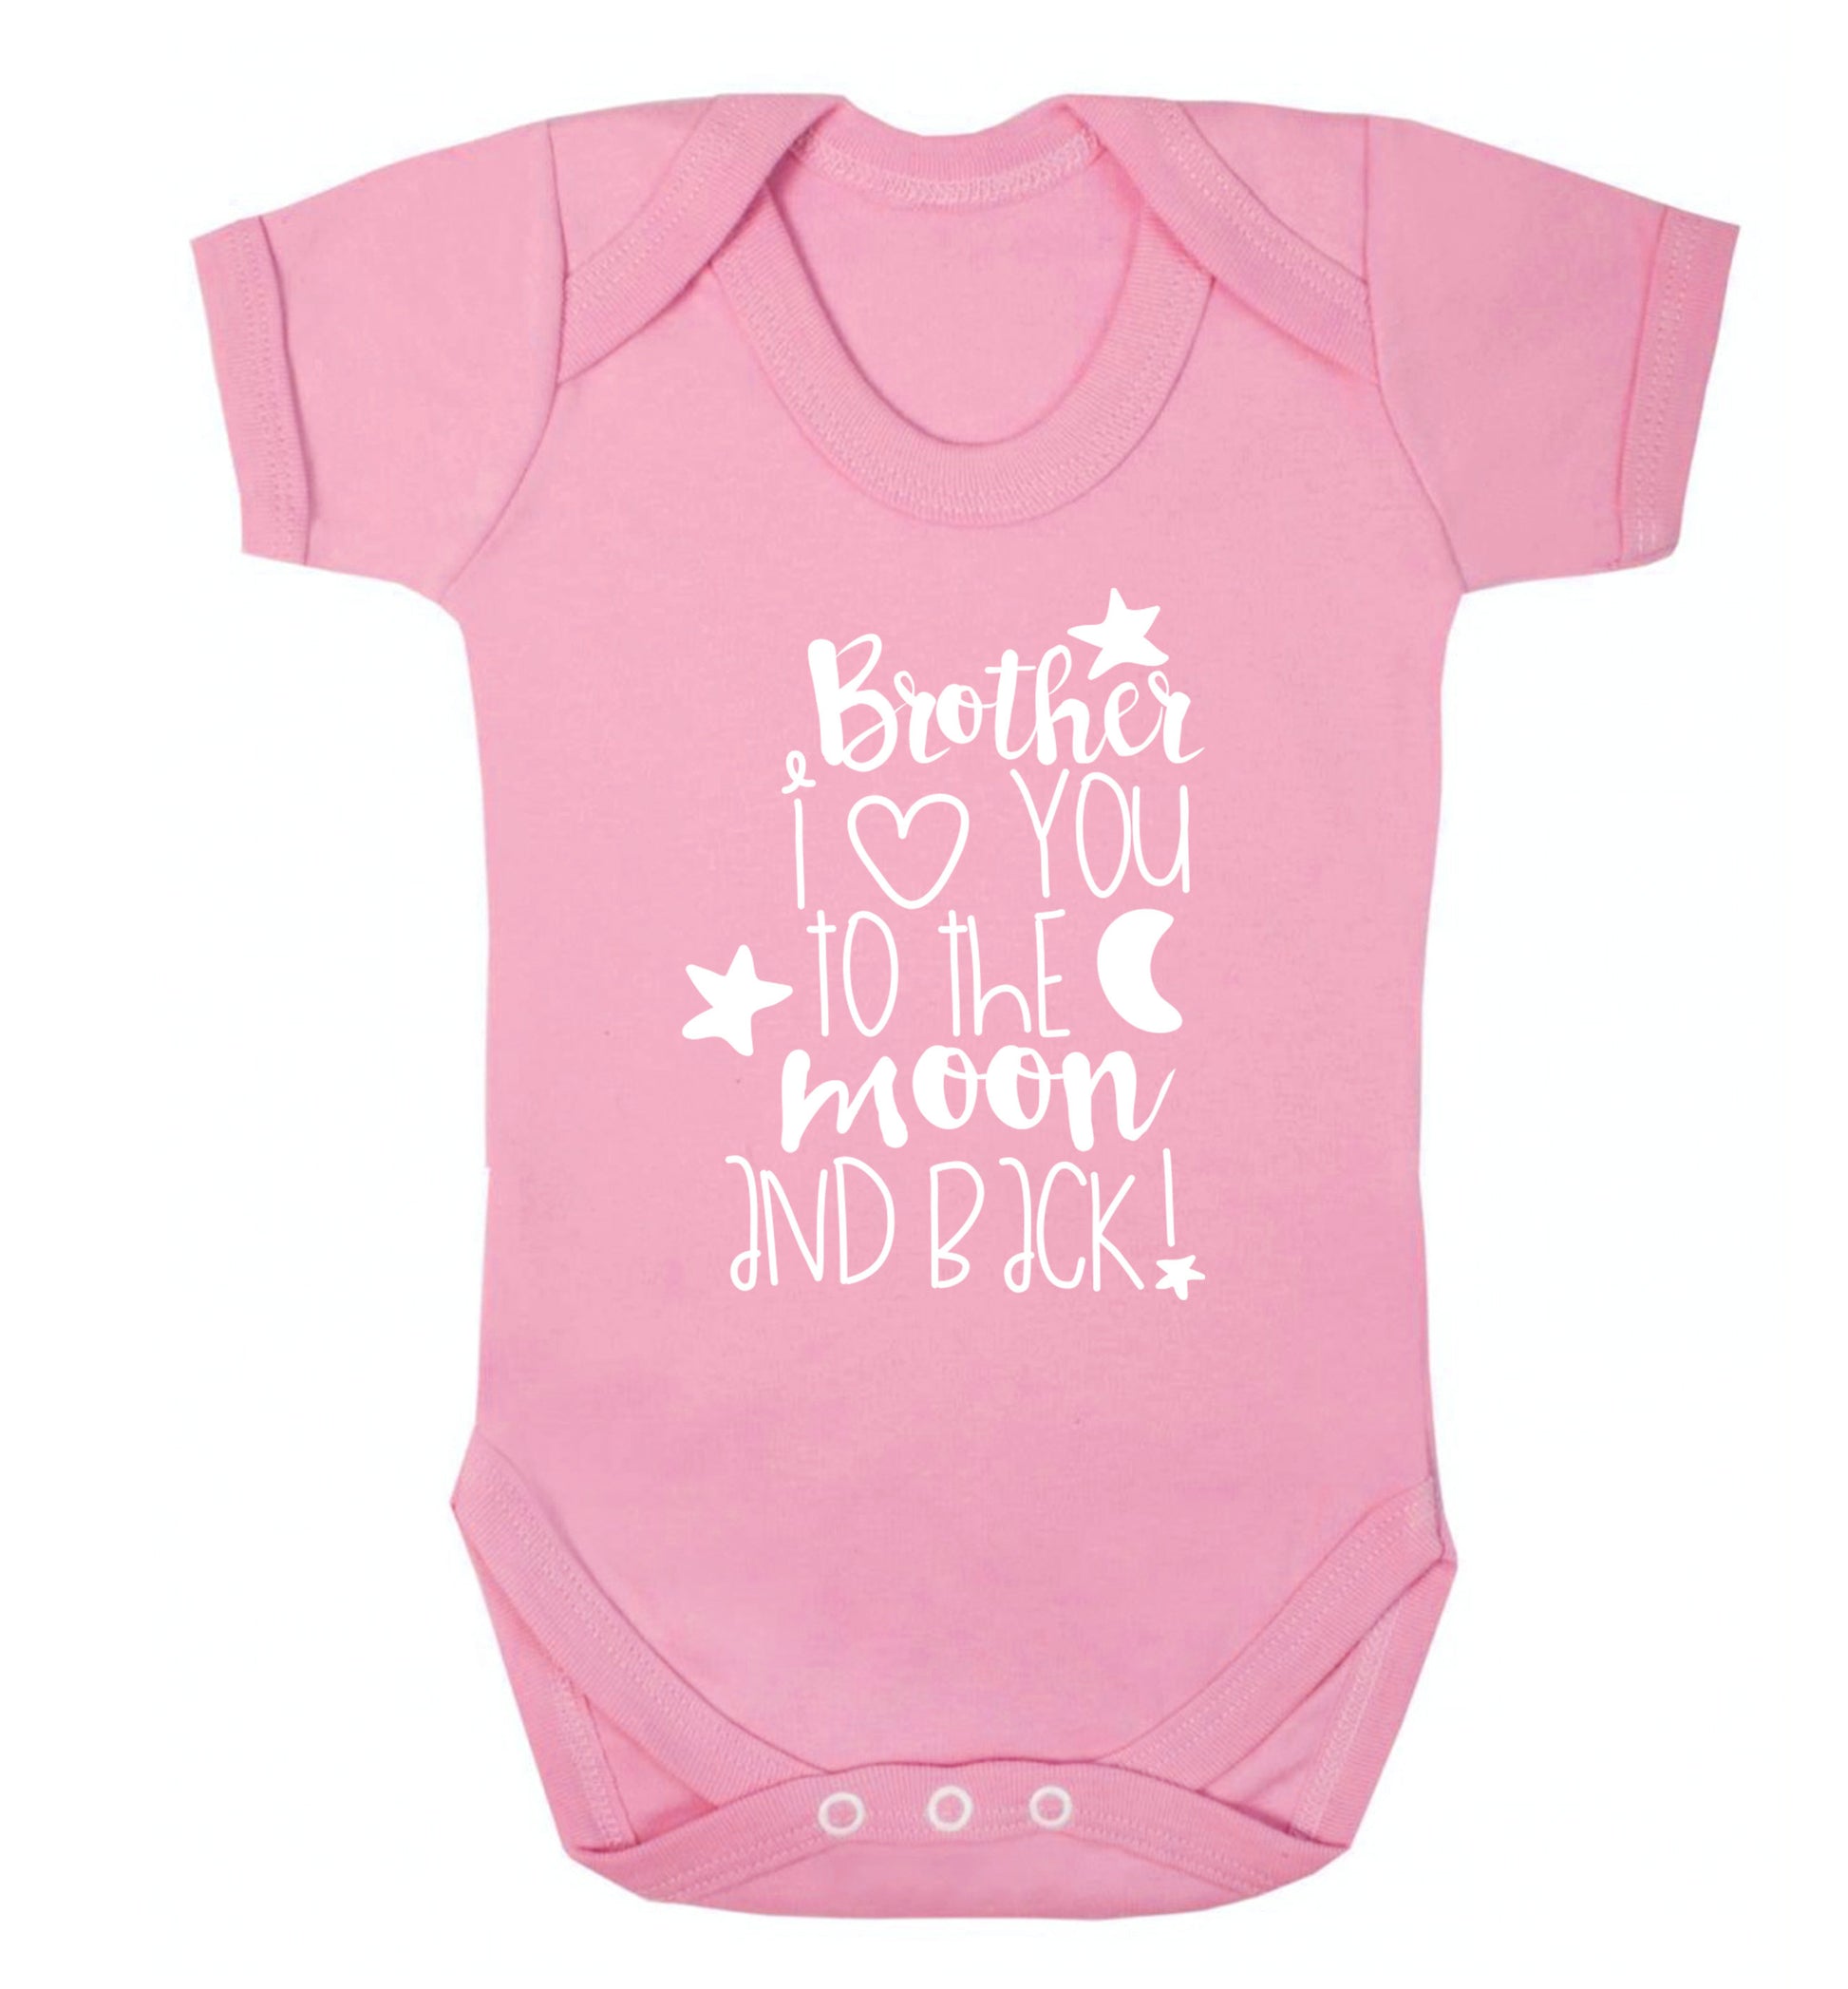 Brother I love you to the moon and back Baby Vest pale pink 18-24 months